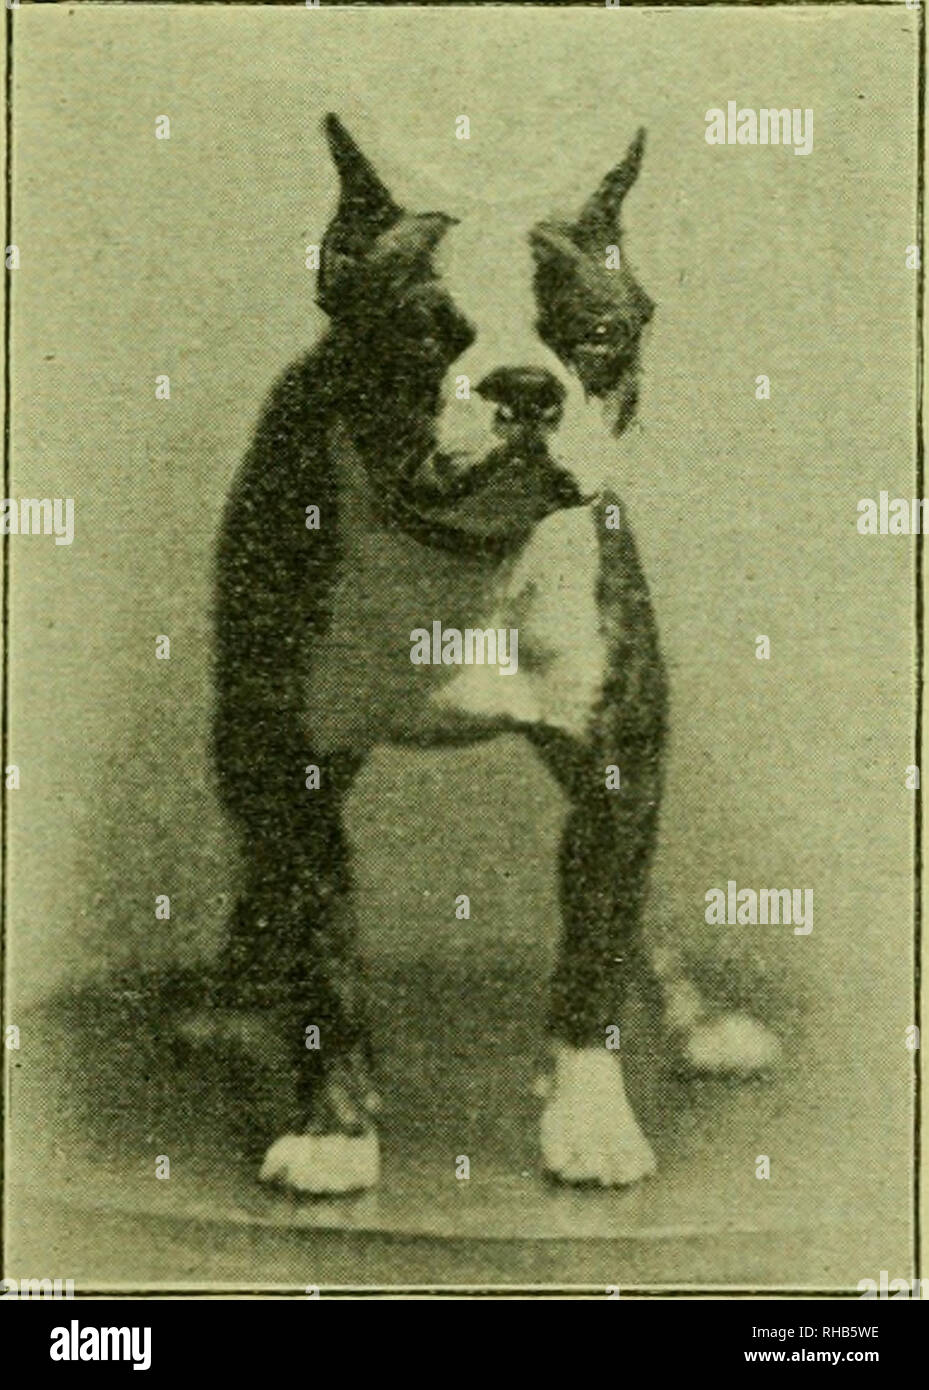 . The Boston terrier; its history, points, breeding, rearing, training, and care, together with several instructive chapters on management and diseases of dogs from a common sense view. Boston terrier. VET T'eight ]3io pounds A. K. C. 77.096 QFFER at public ^^^ stud for the low fee of $25.00 the greatest Boston sire of the age, VET a dog who has been at stud less than a year and who has sired six big winners. A cobbly little lightweight, of perfect markings and screw tail. Also his best son, the grand VET II A great son of a great sire, who has inherited his daddy's ability to get the right k Stock Photo